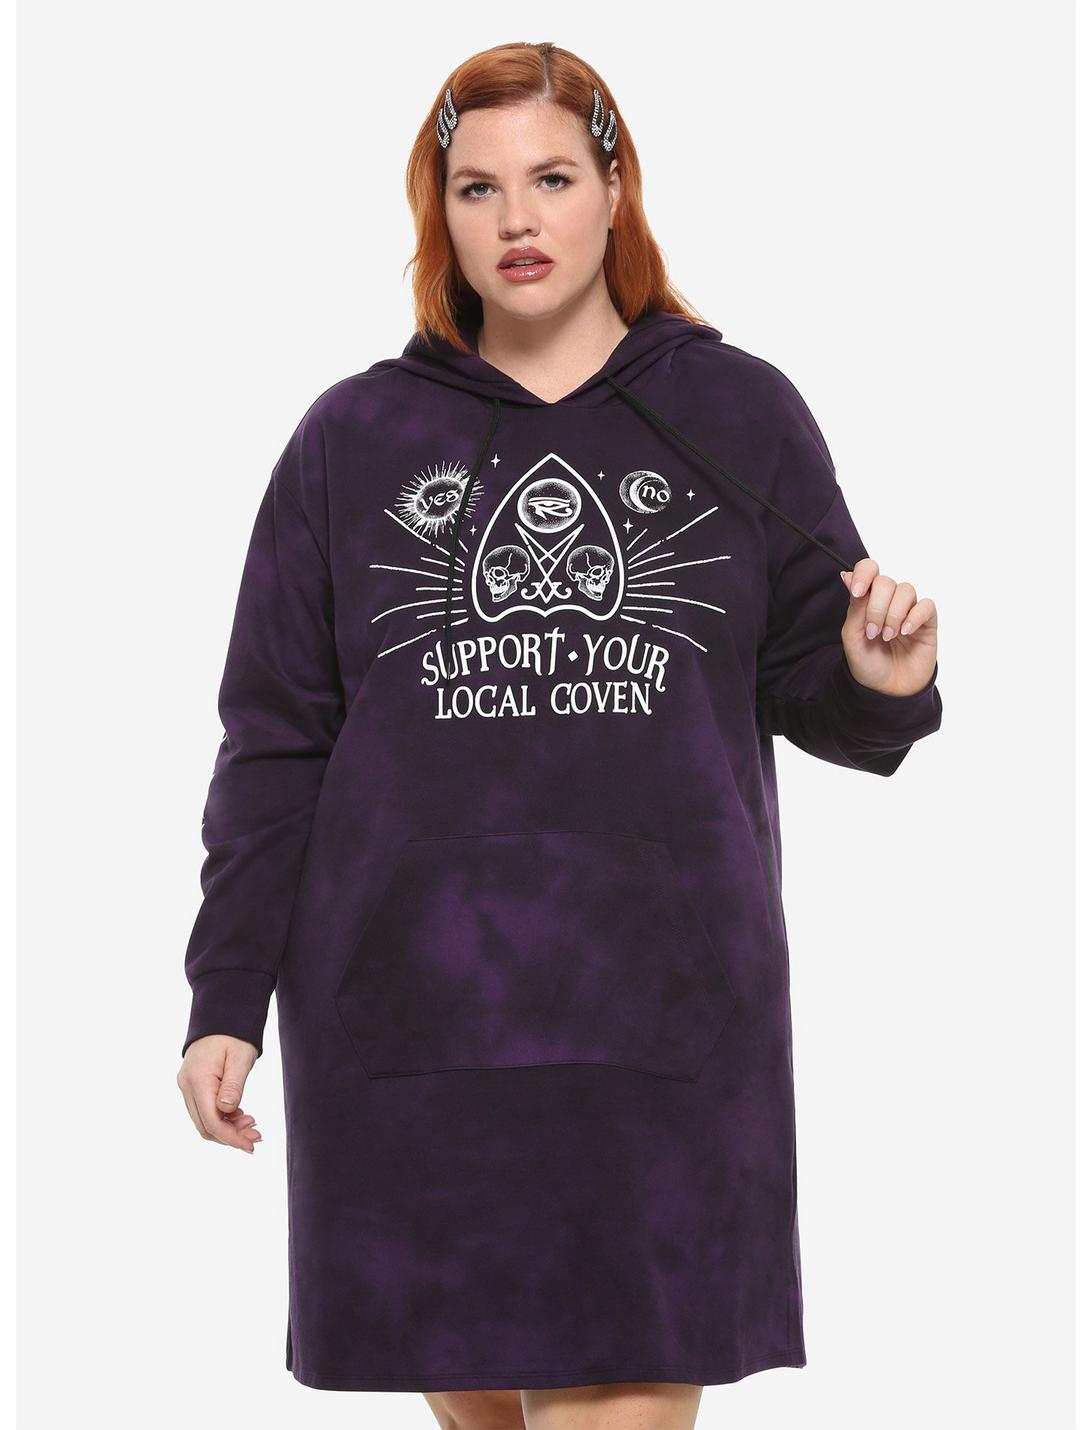 Support Your Local Coven Purple Tie-Dye Hoodie Dress Plus Size, TIE DYE, hi-res